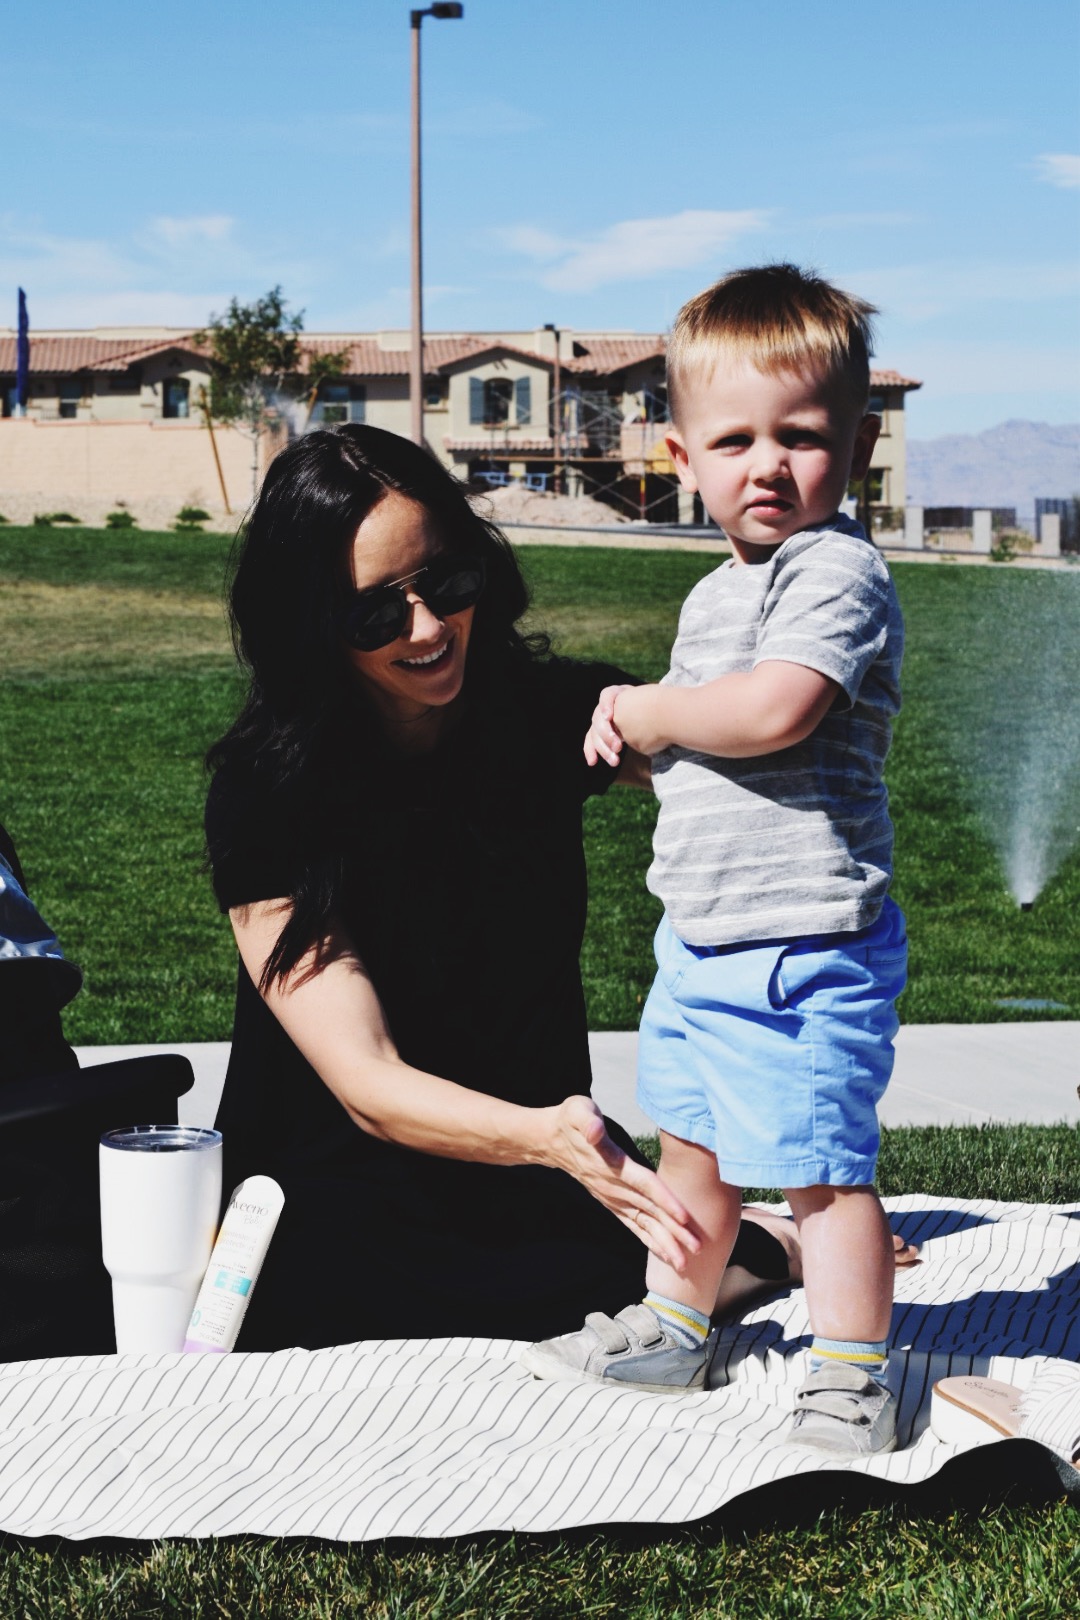 Best Baby Sunscreen featured by Las Vegas lifestyle blogger, Outfits & Outings